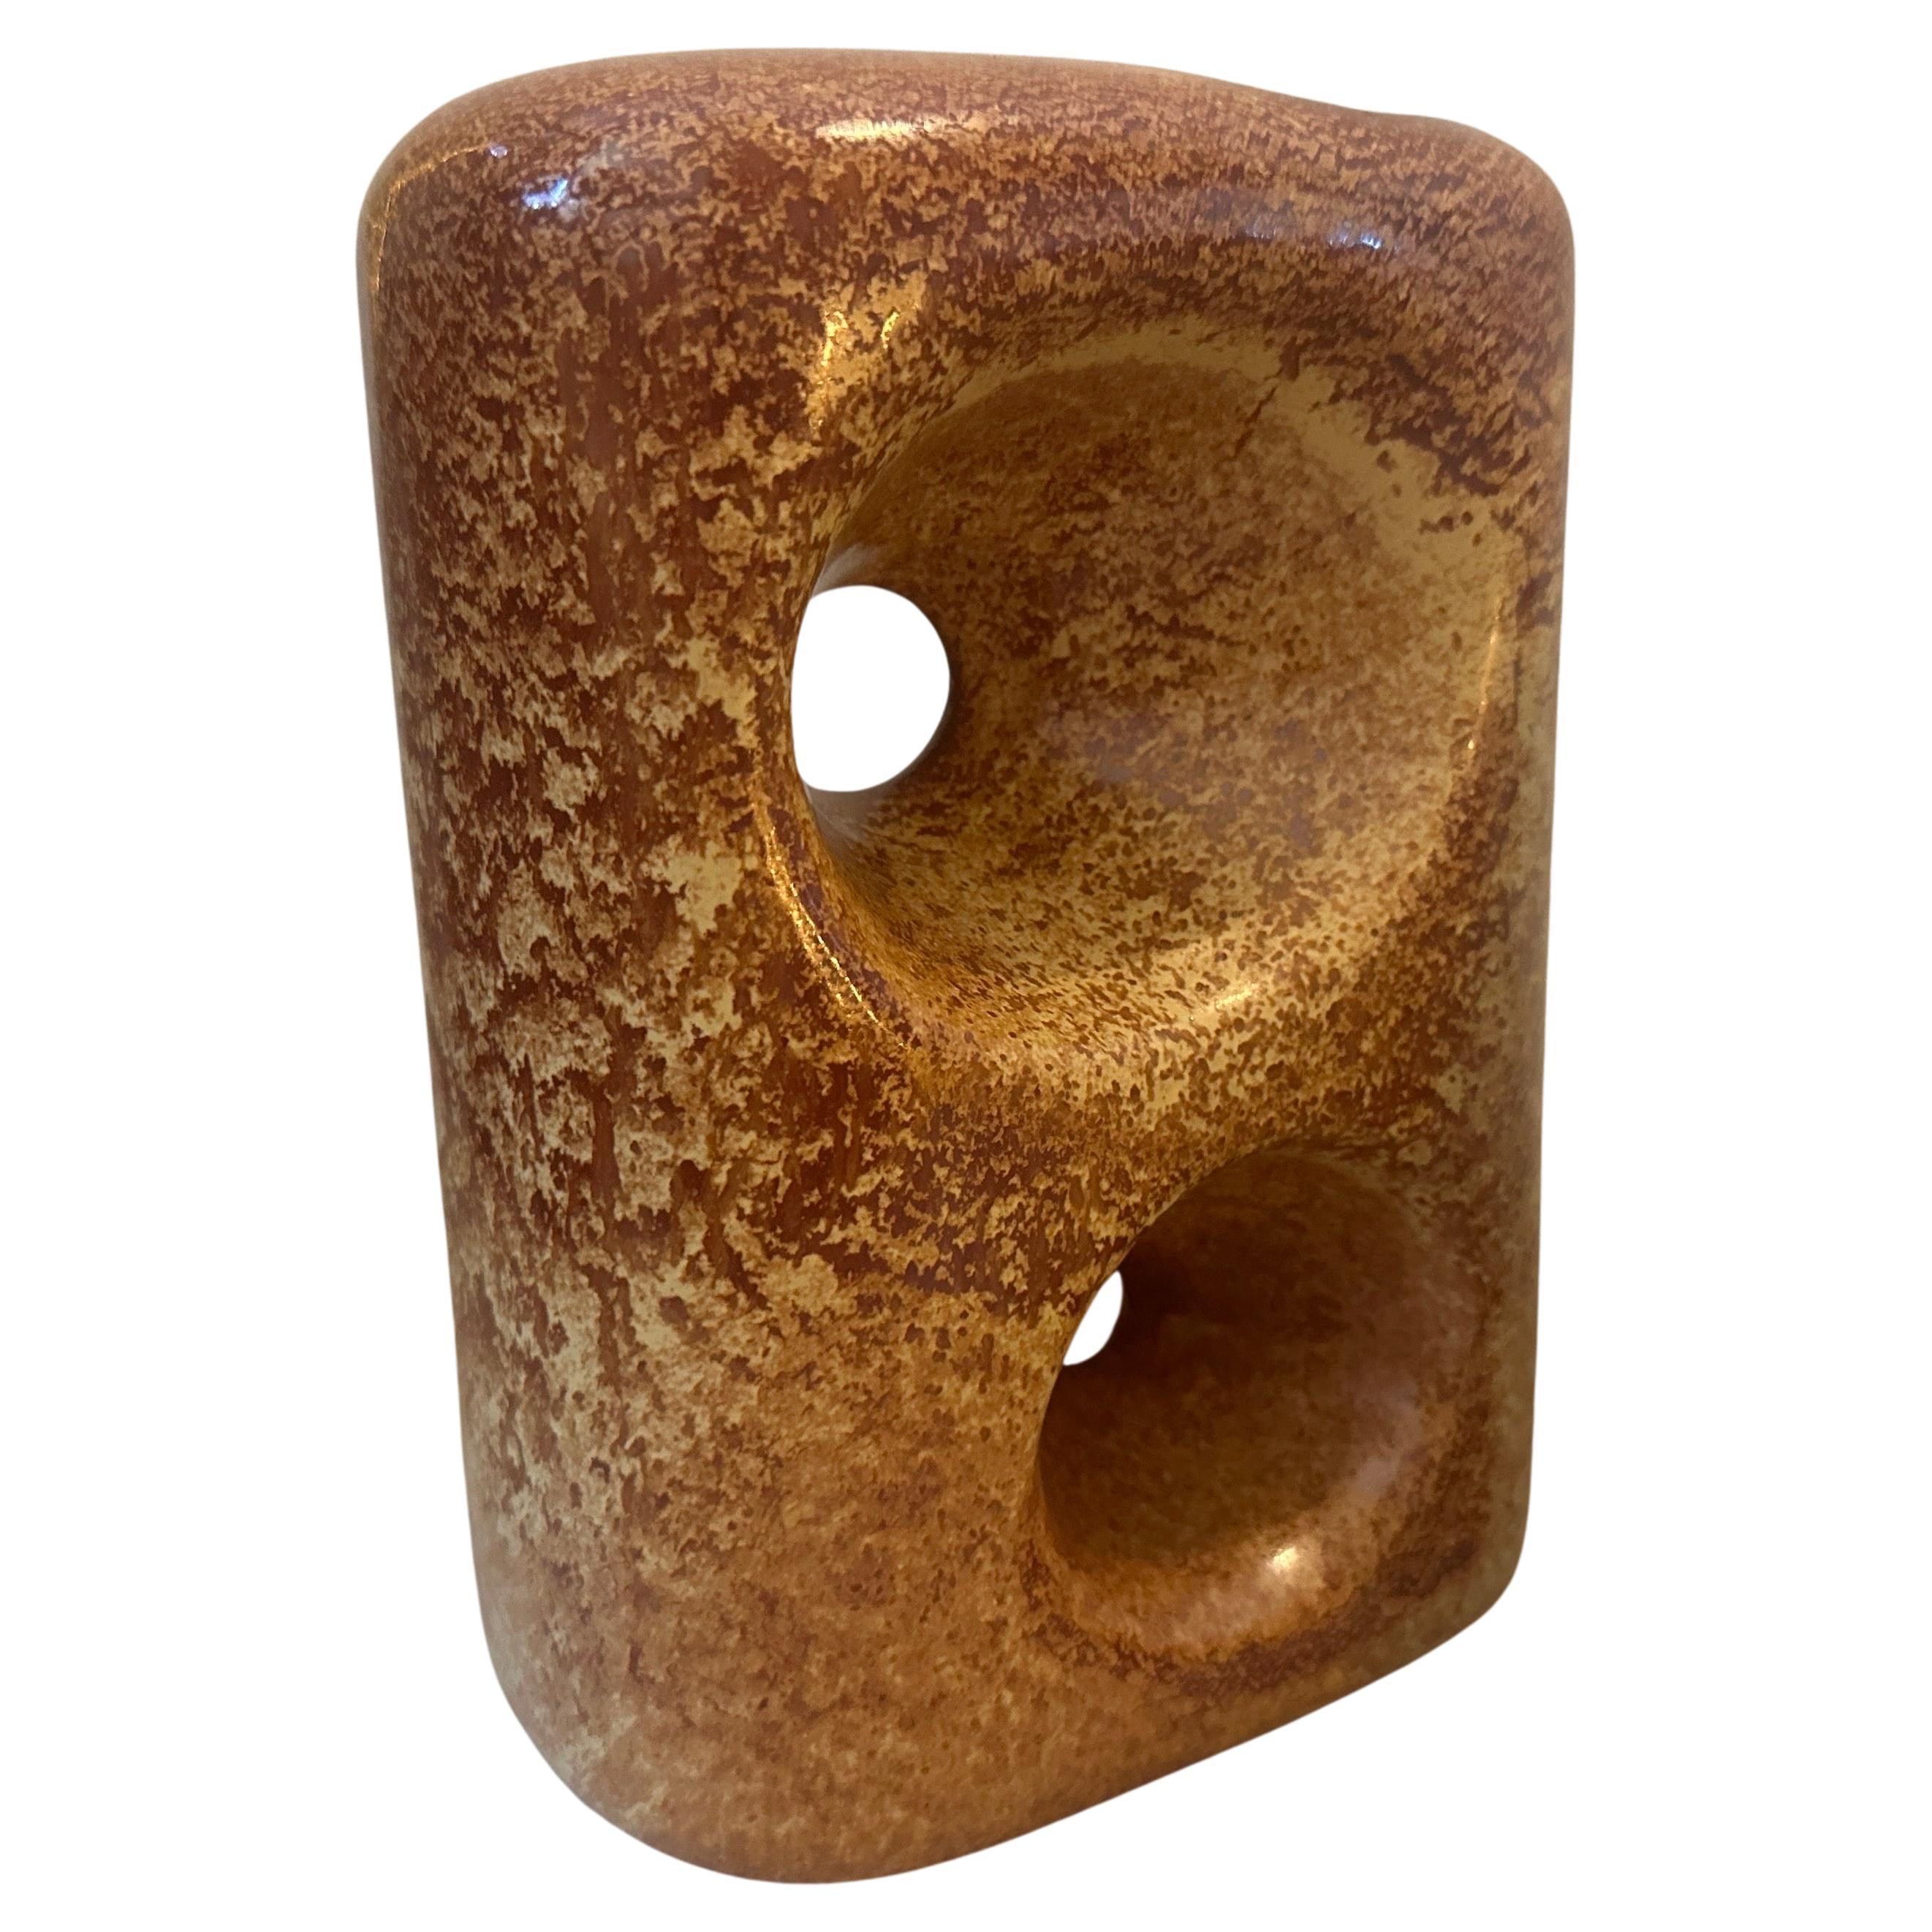 Two iconic brown and beige ceramic vases designed and manufactured in Italy by Bertoncello in the Seventies, they embody the design characteristics of the period, showcasing a blend of modernism, earthy tones, and Italian craftsmanship.The height of